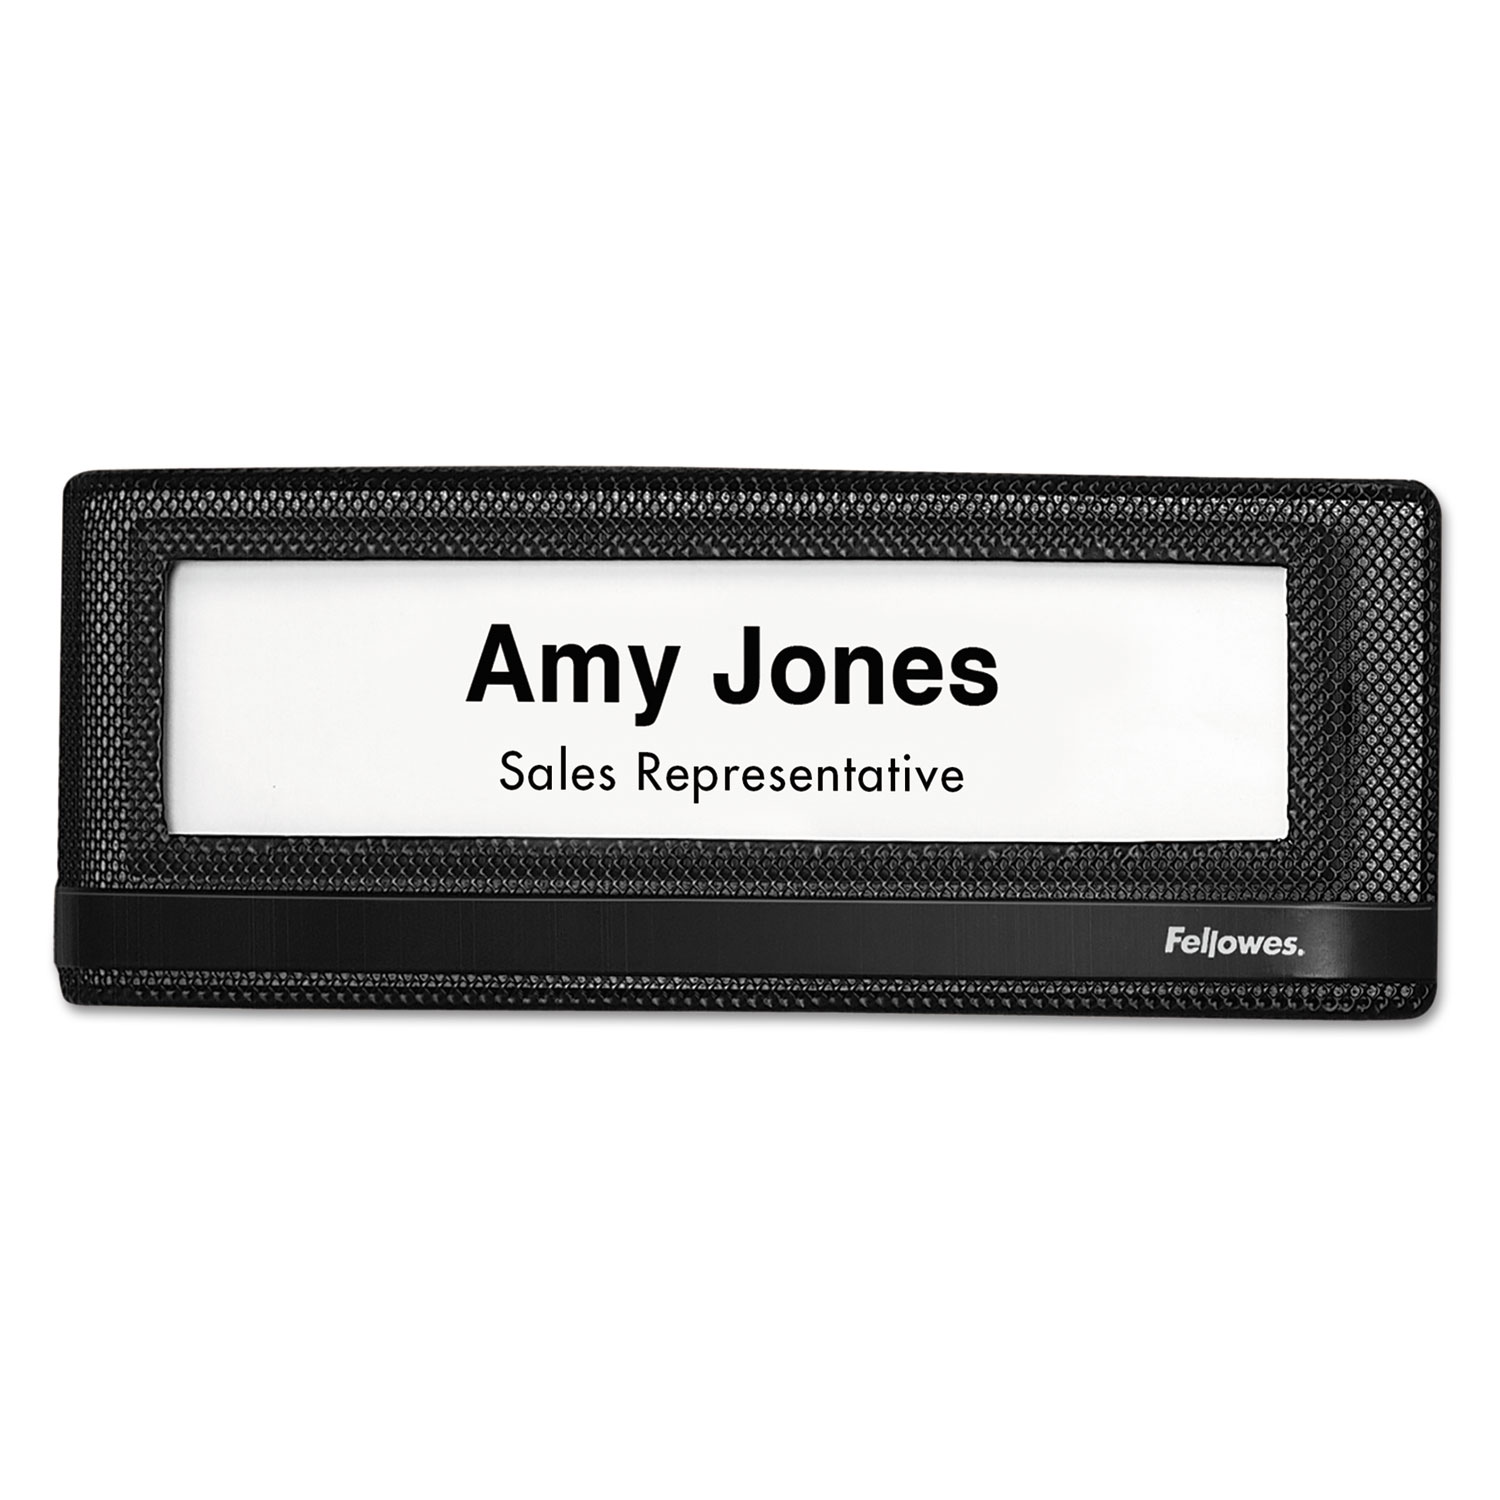  Fellowes 7703201 Mesh Partition Additions Nameplate, 9 1/4 x 5/8 x 3 3/8, Black (FEL7703201) 